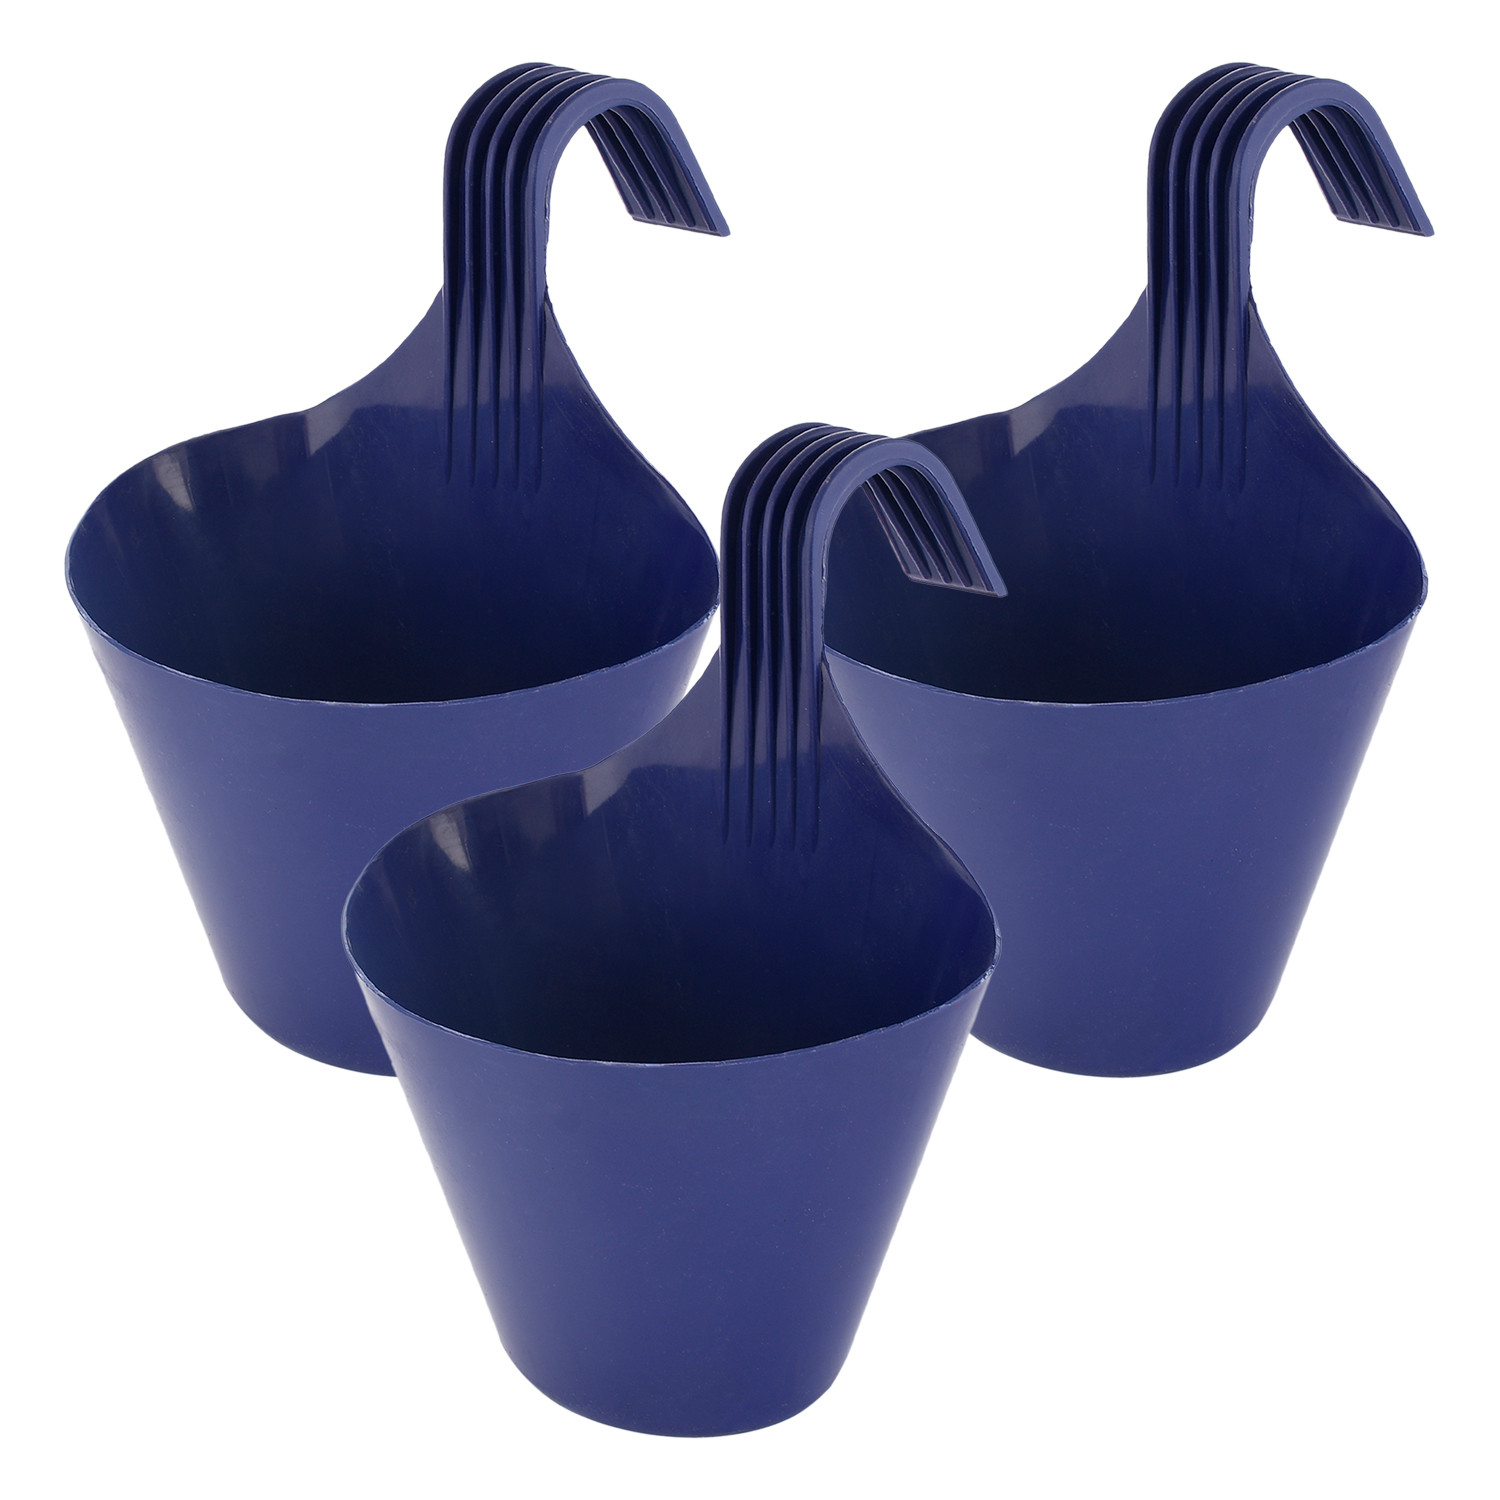 Kuber Industries Hanging Flower Pot|Single Hook Plant Container|Durable Plastic Glossy Finish Pots for Home|Balcony|Garden|9 Inch|(Blue)